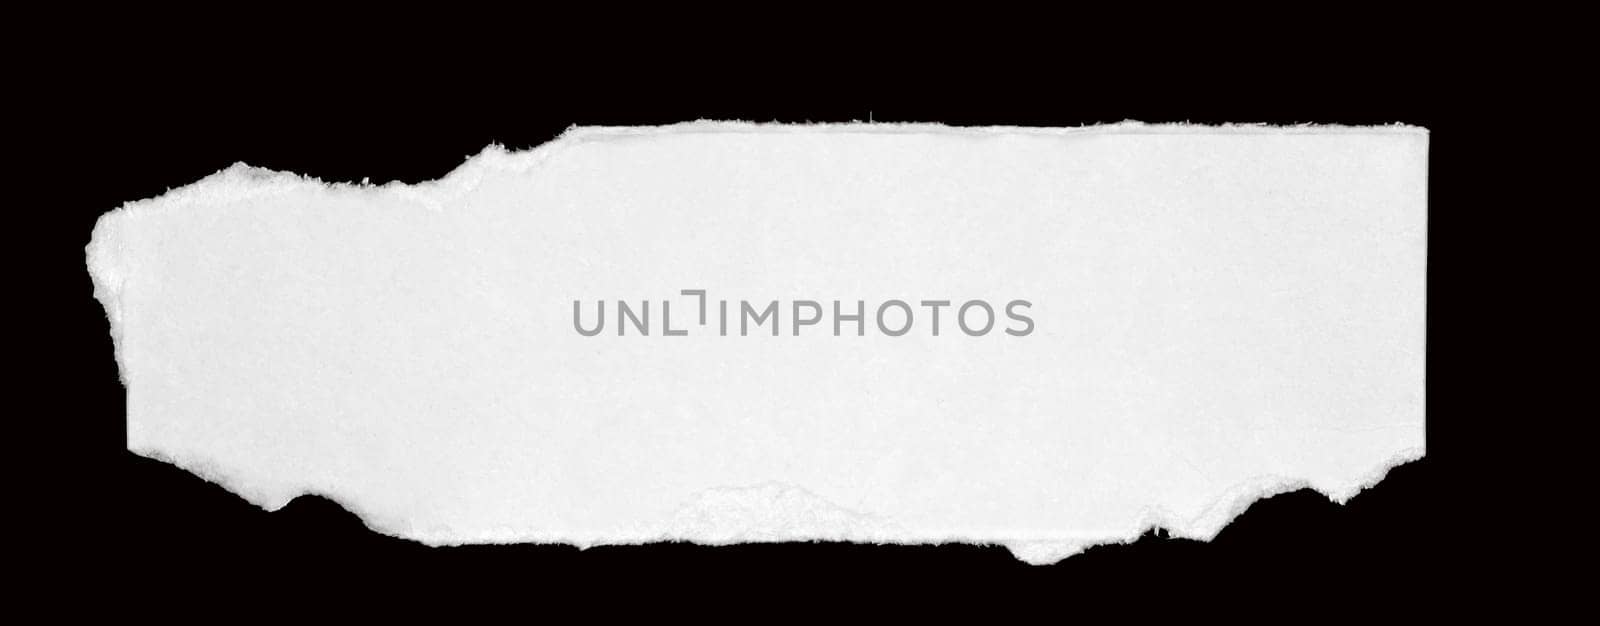 white paper ripped message torn, isolated on black by EdVal